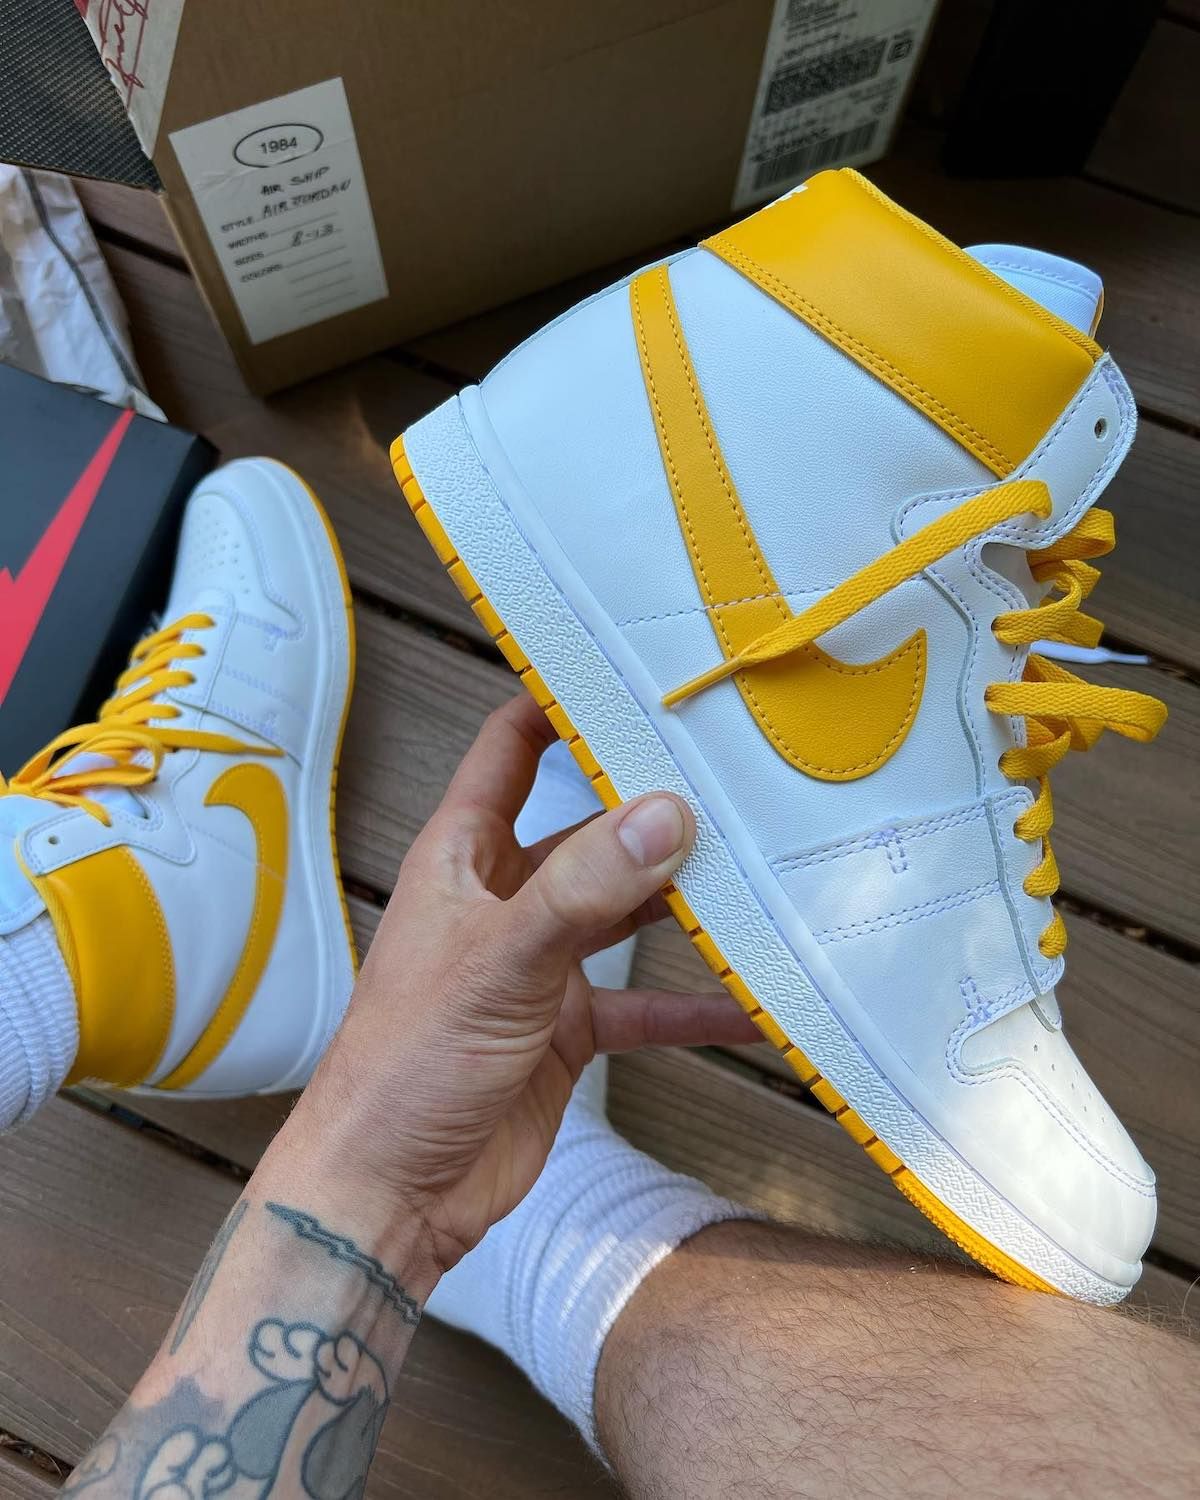 Where to Buy the Nike Air Ship “University Gold” | House of Heat°